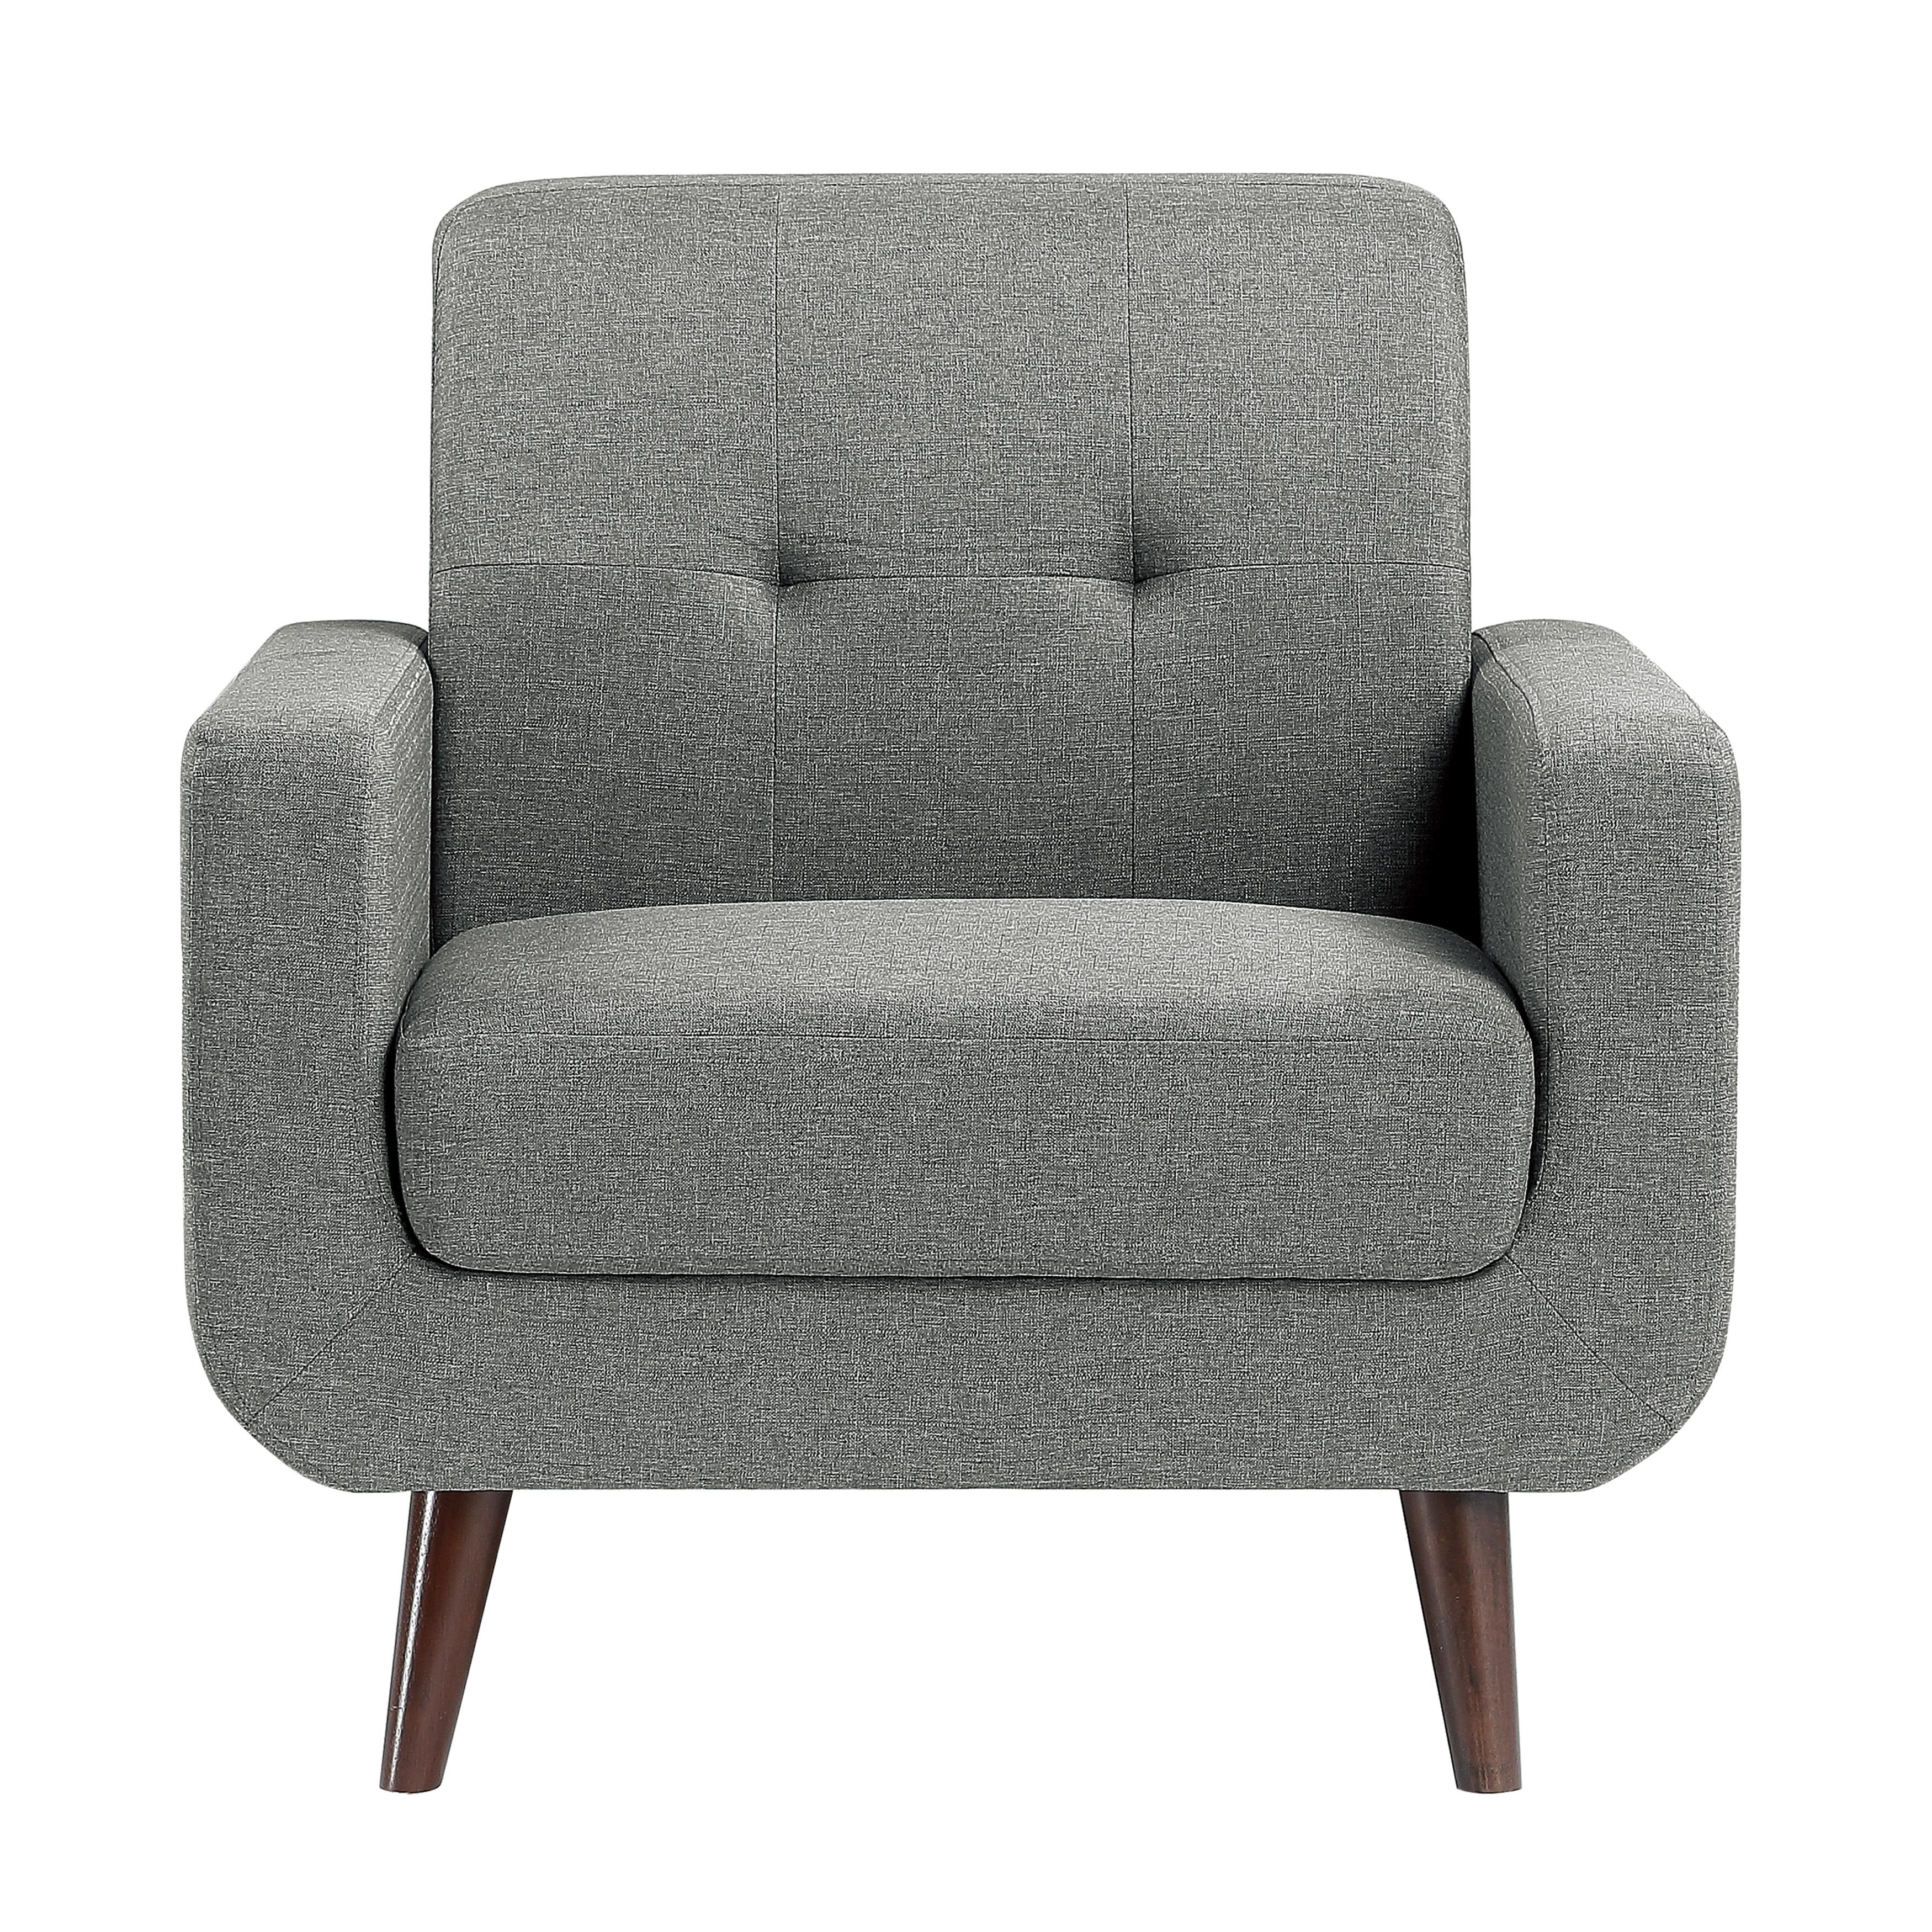 Modern Arm Chair 9433GY-1 Fitch 9433GY-1 in Gray 